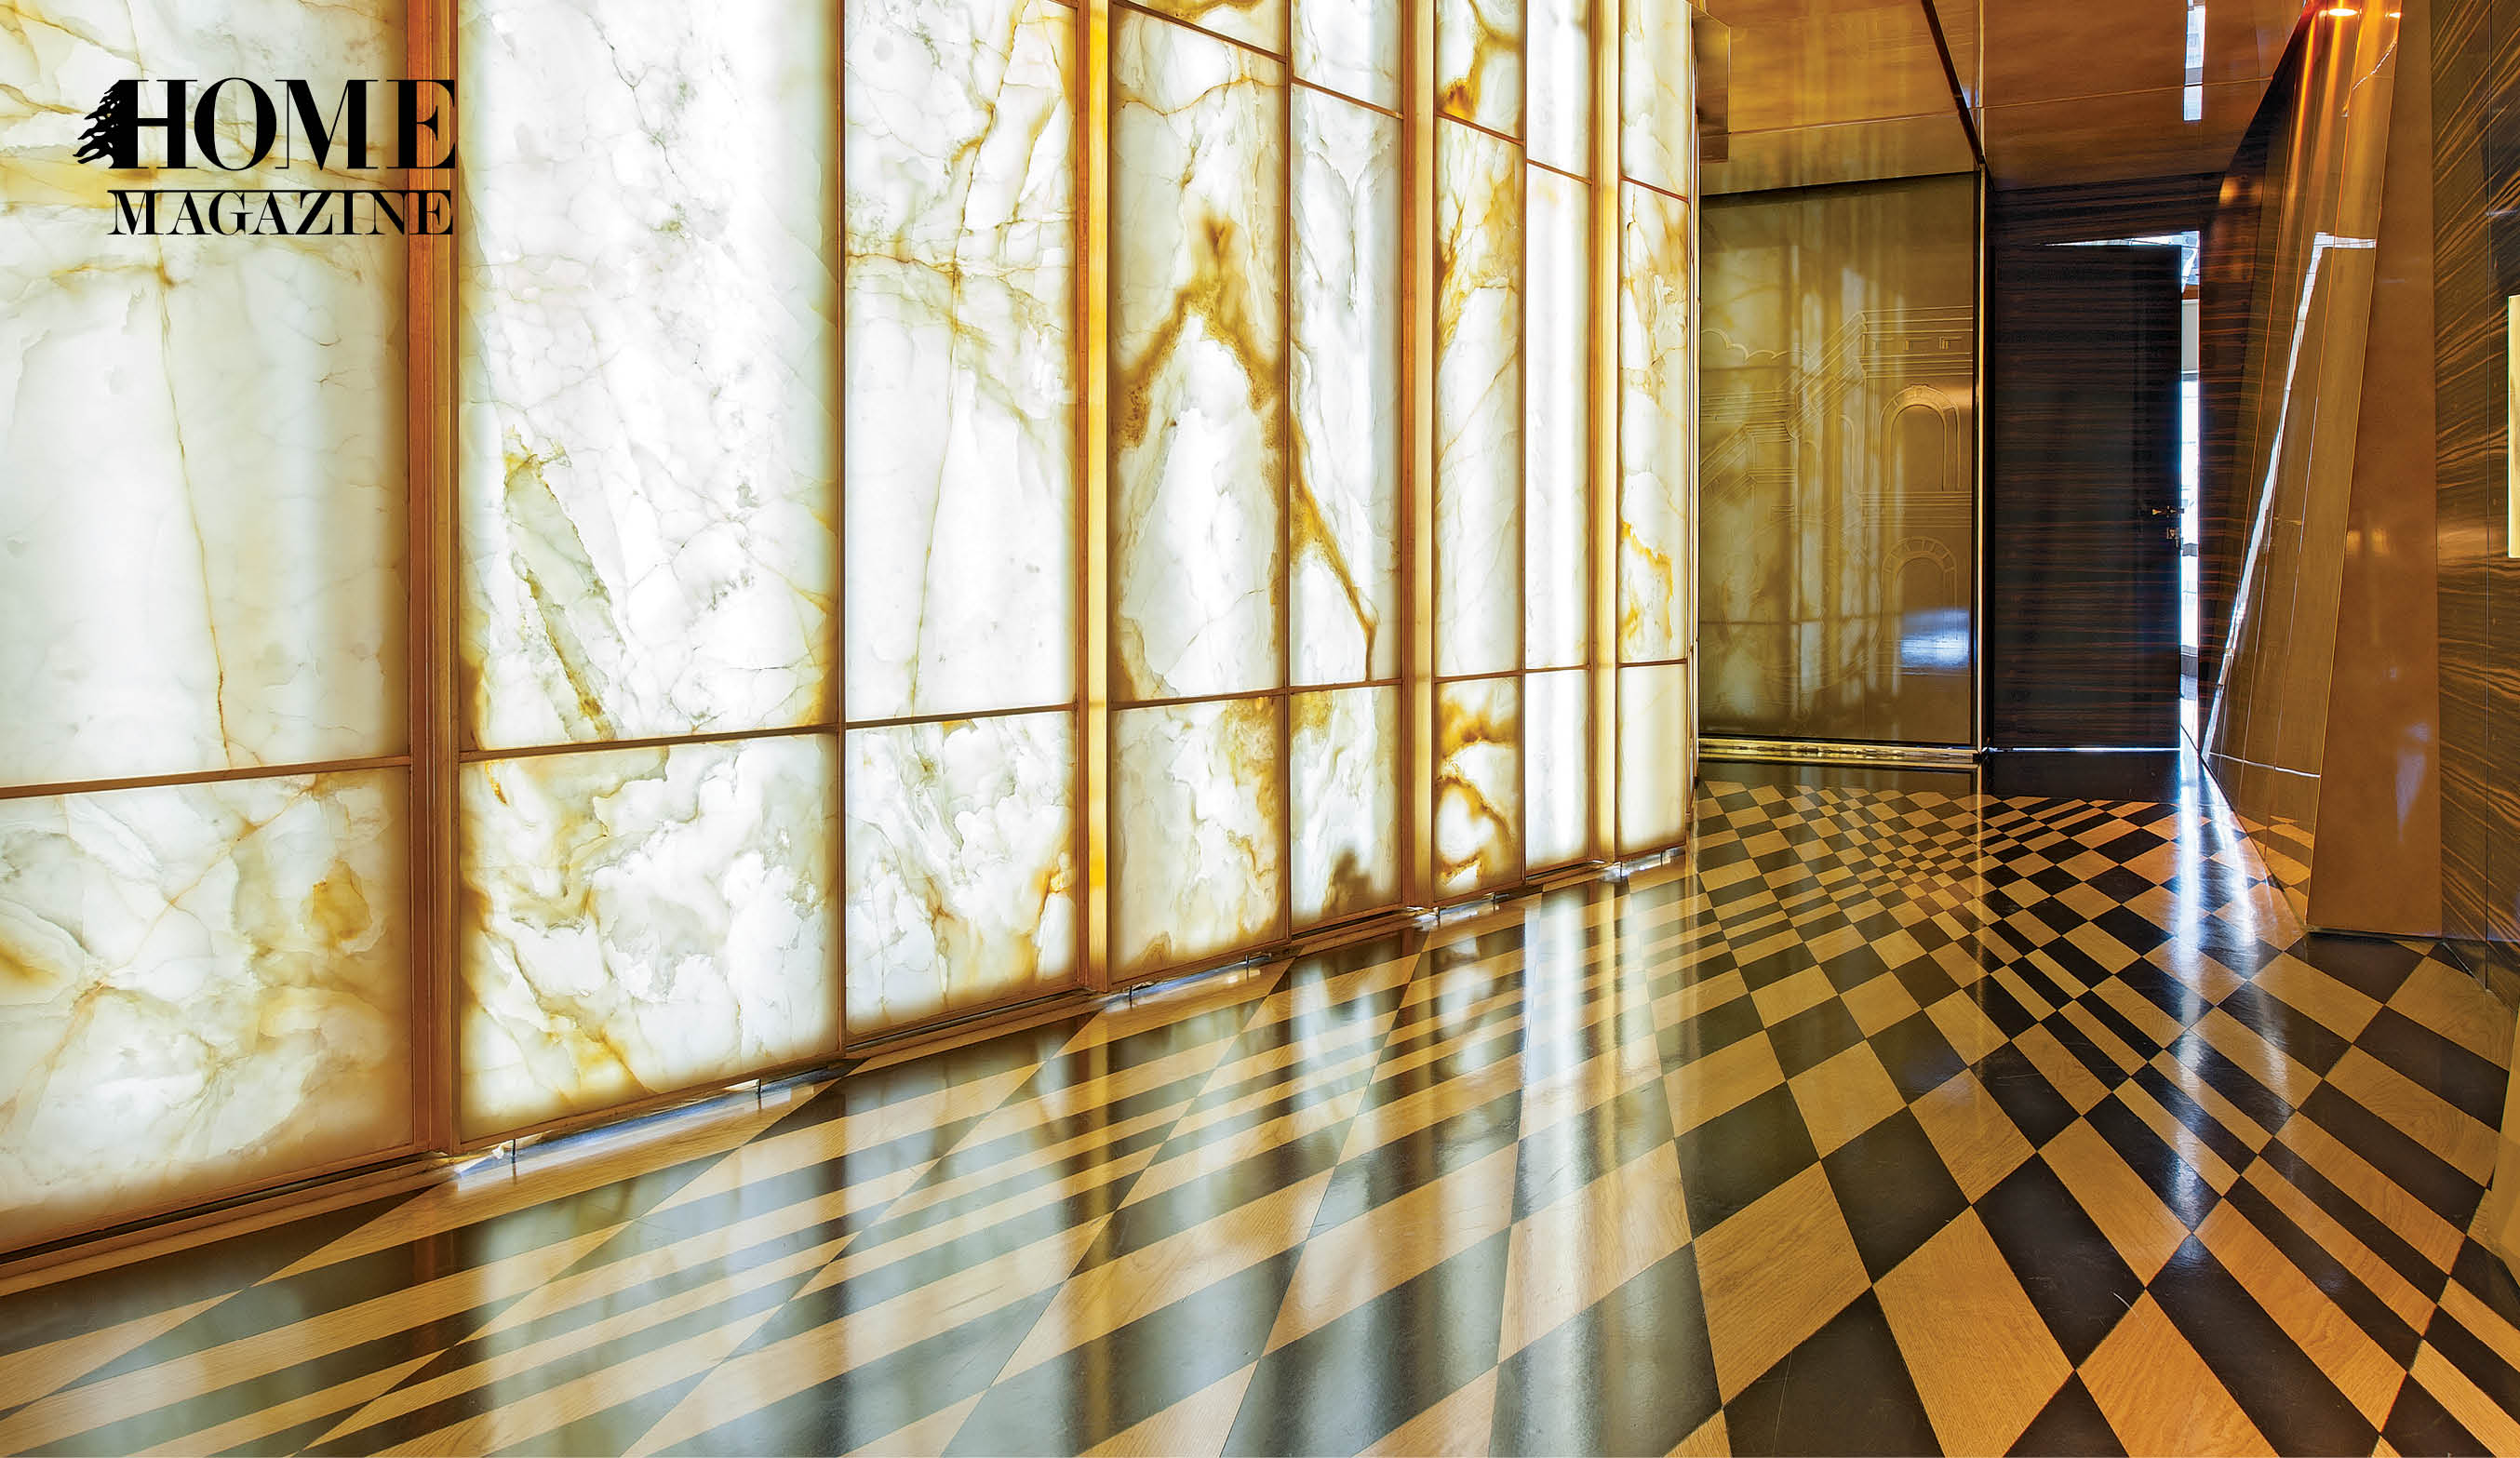 Patterned brown and orange floor with glass wall